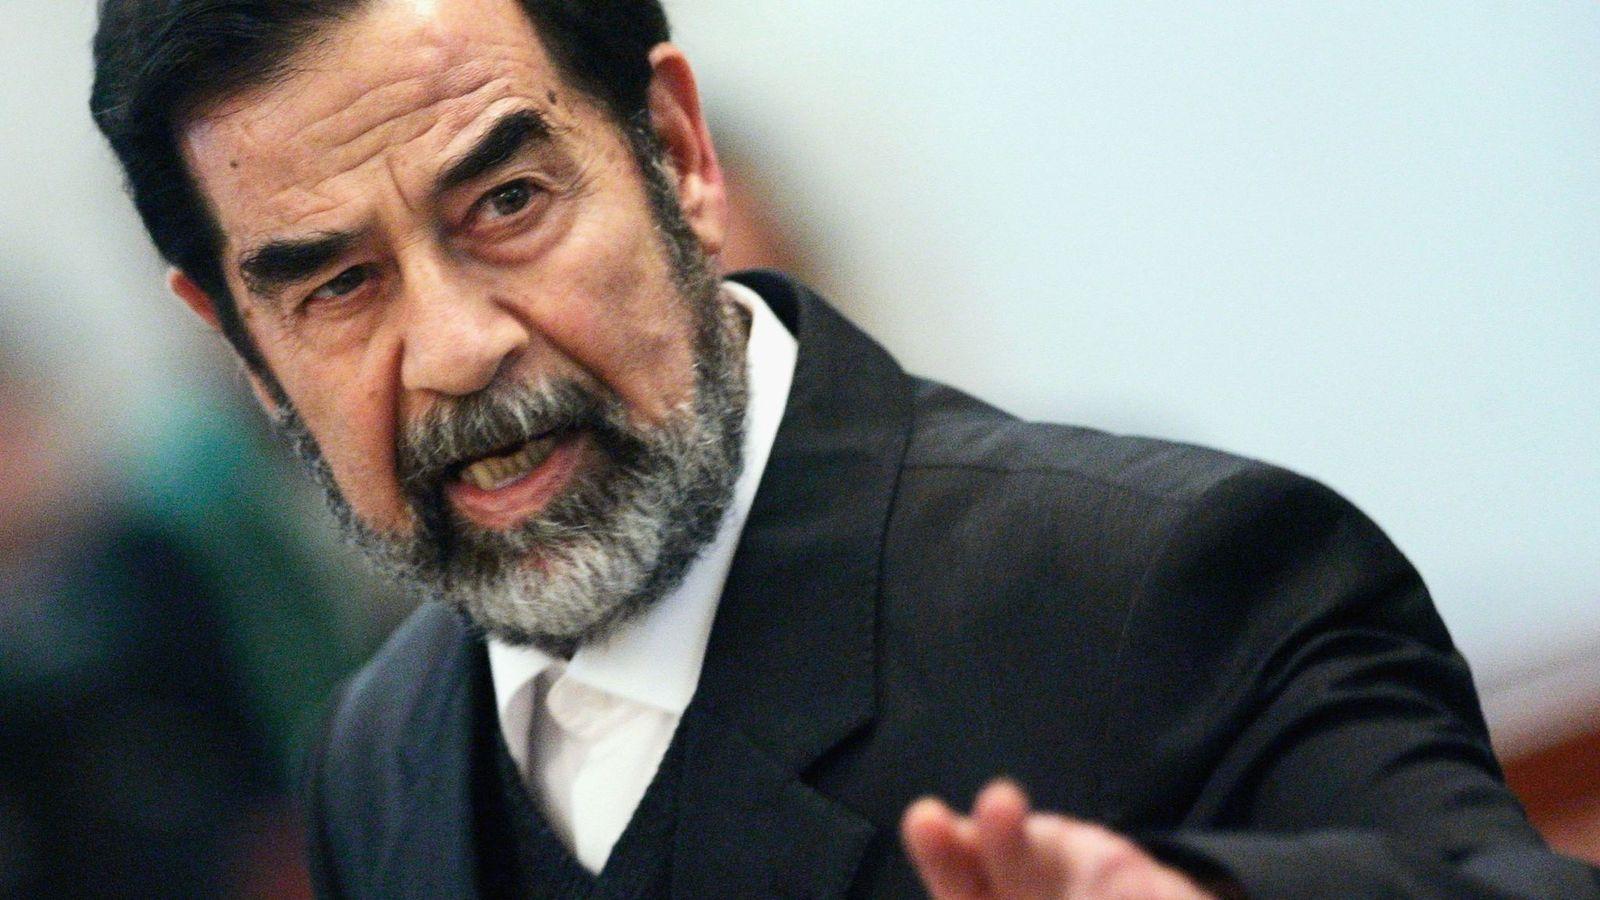 Saddam Hussein warned the US it could not govern Iraq